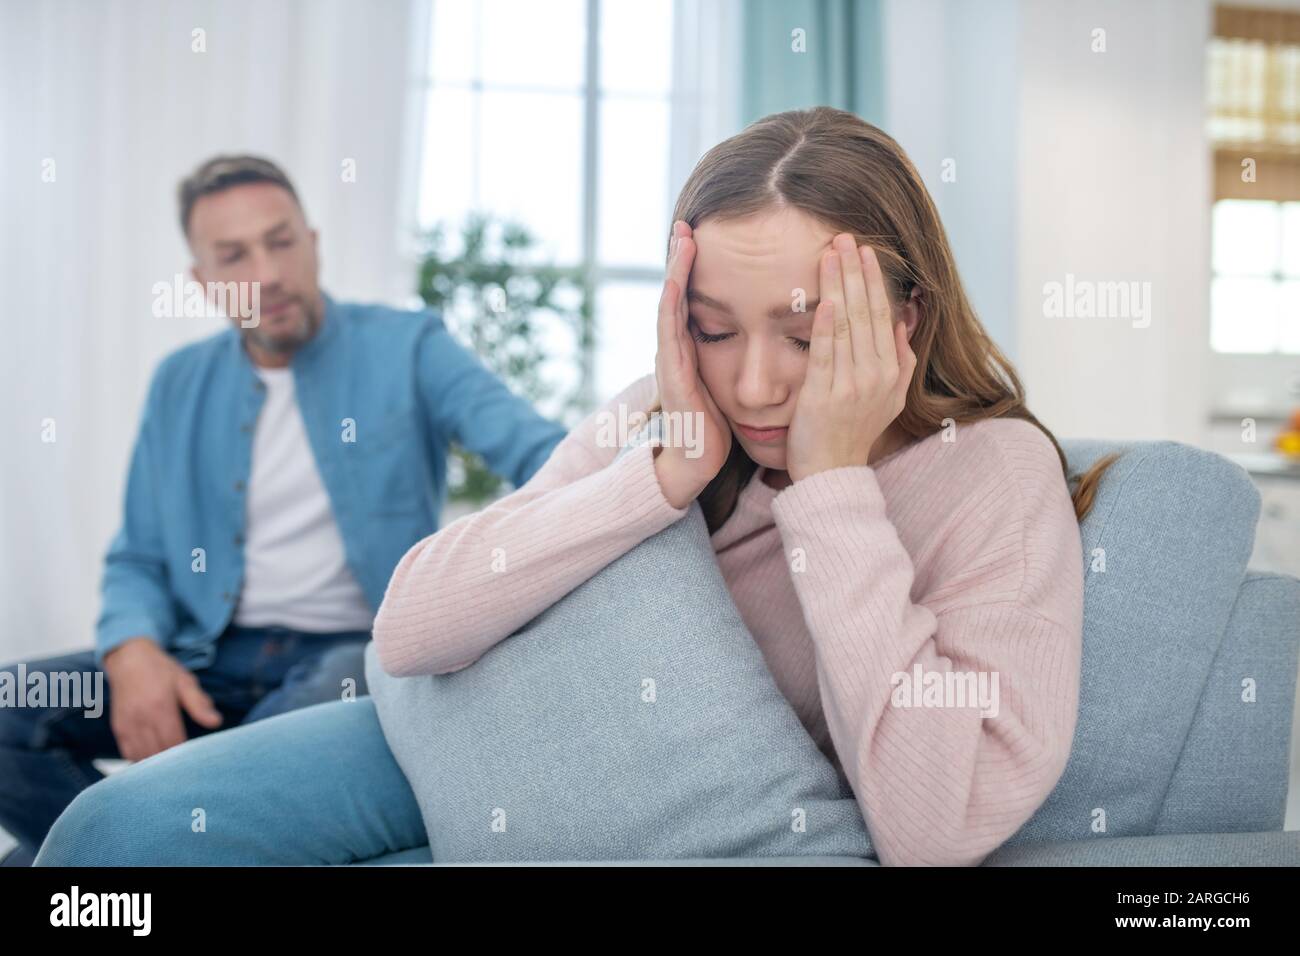 Daughter covering her face with hands, turning away from father. Stock Photo